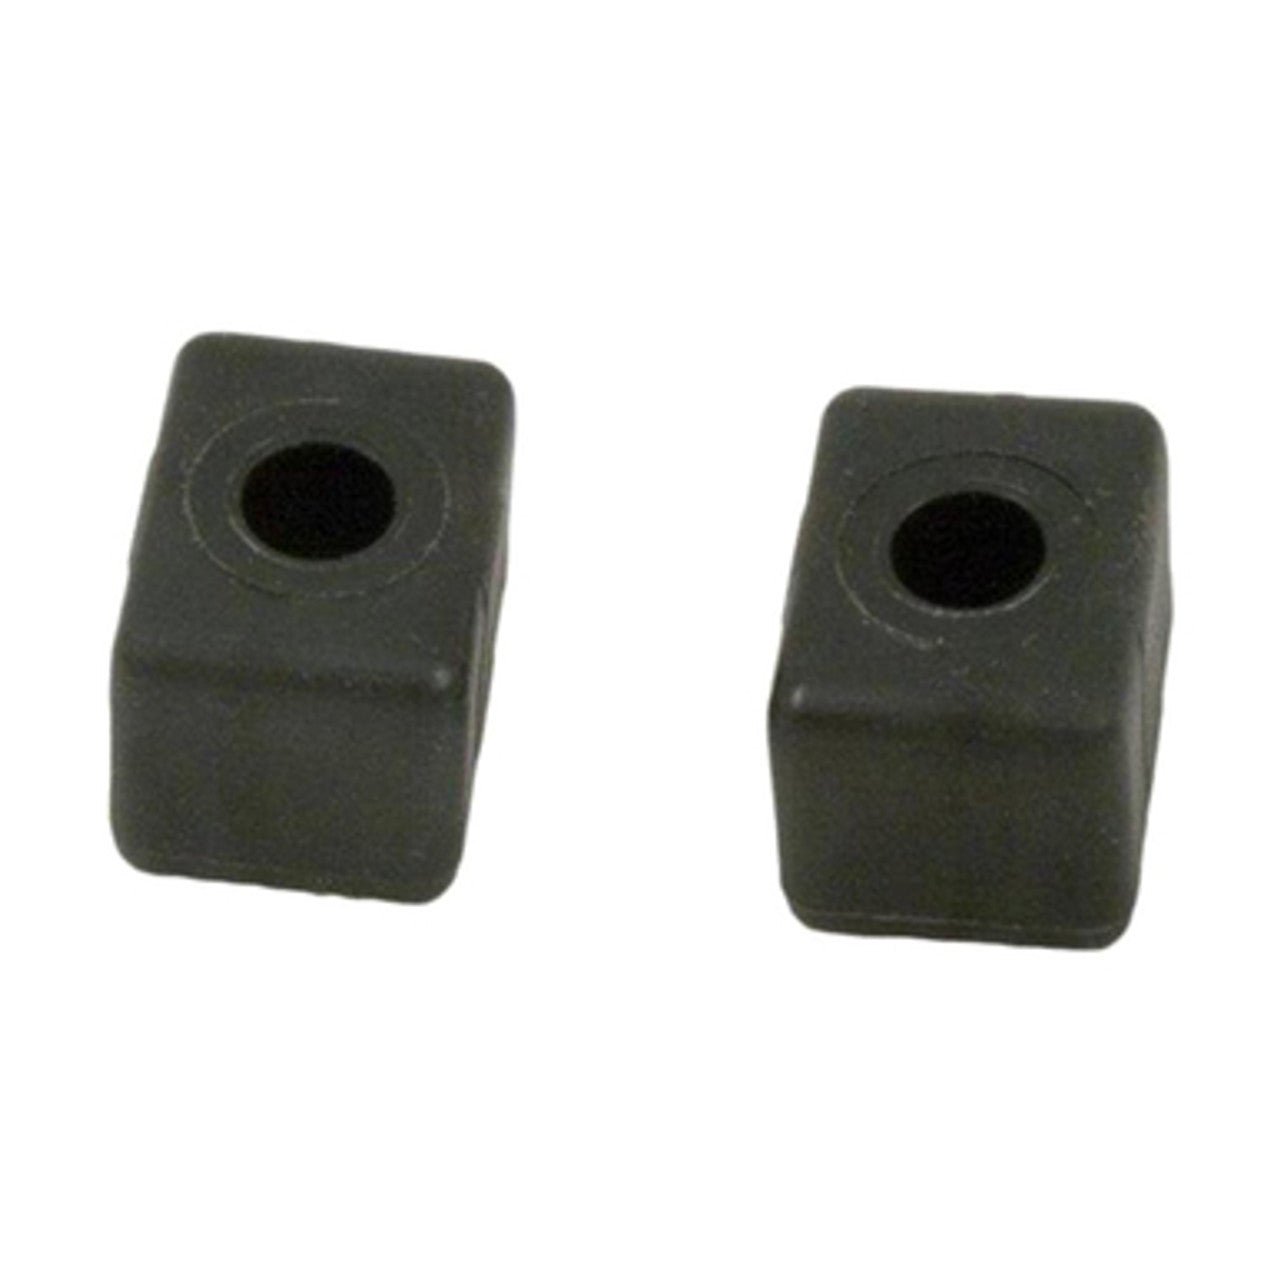 Pentair Block Kit for Great White Cleaner, 2-Pack GW9512 - Cleaner Parts - img-1